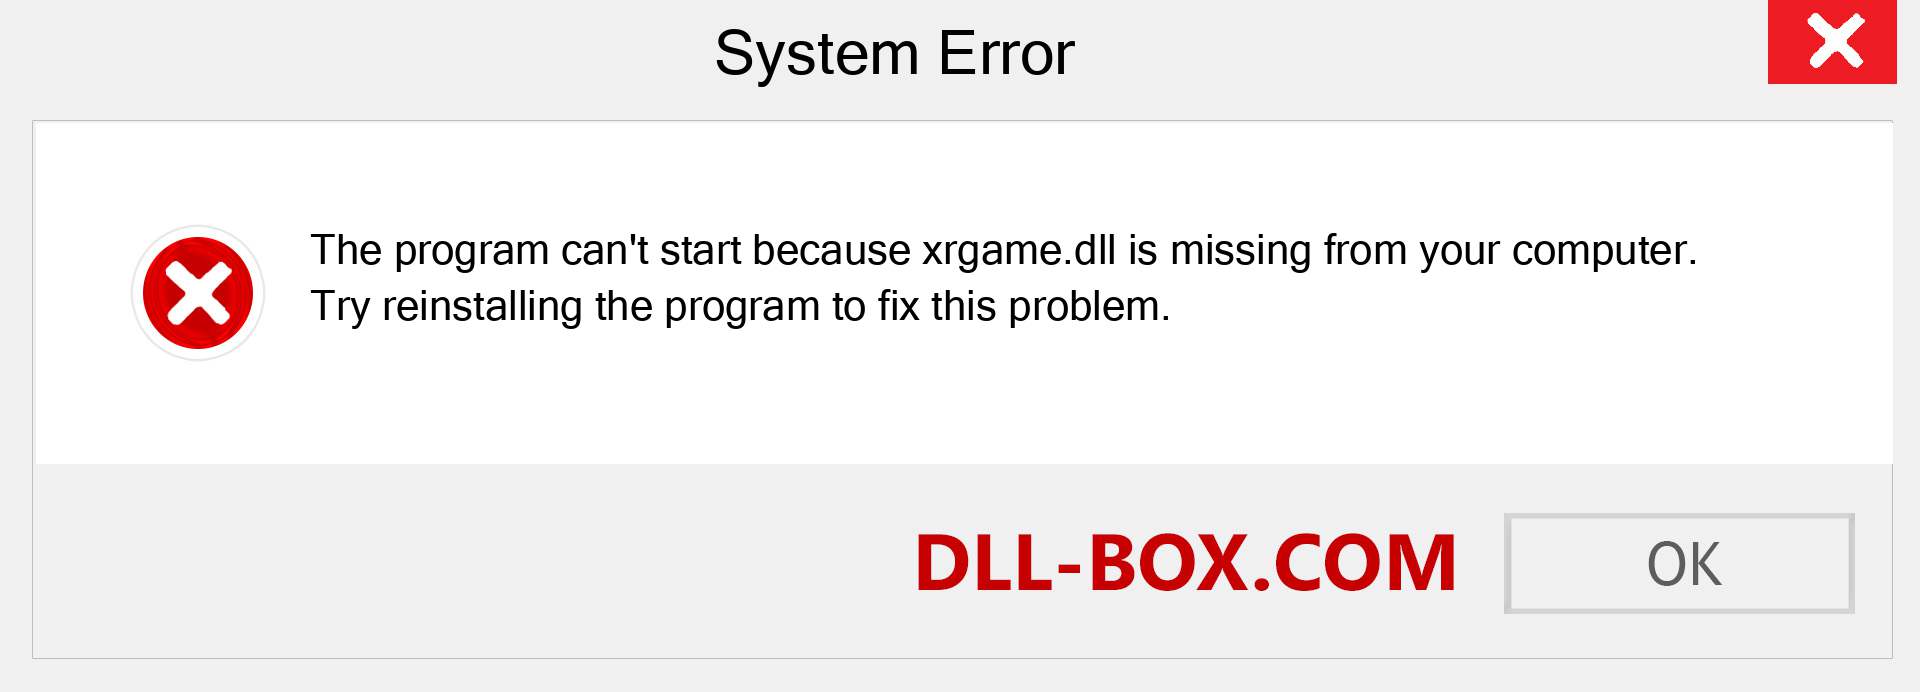  xrgame.dll file is missing?. Download for Windows 7, 8, 10 - Fix  xrgame dll Missing Error on Windows, photos, images